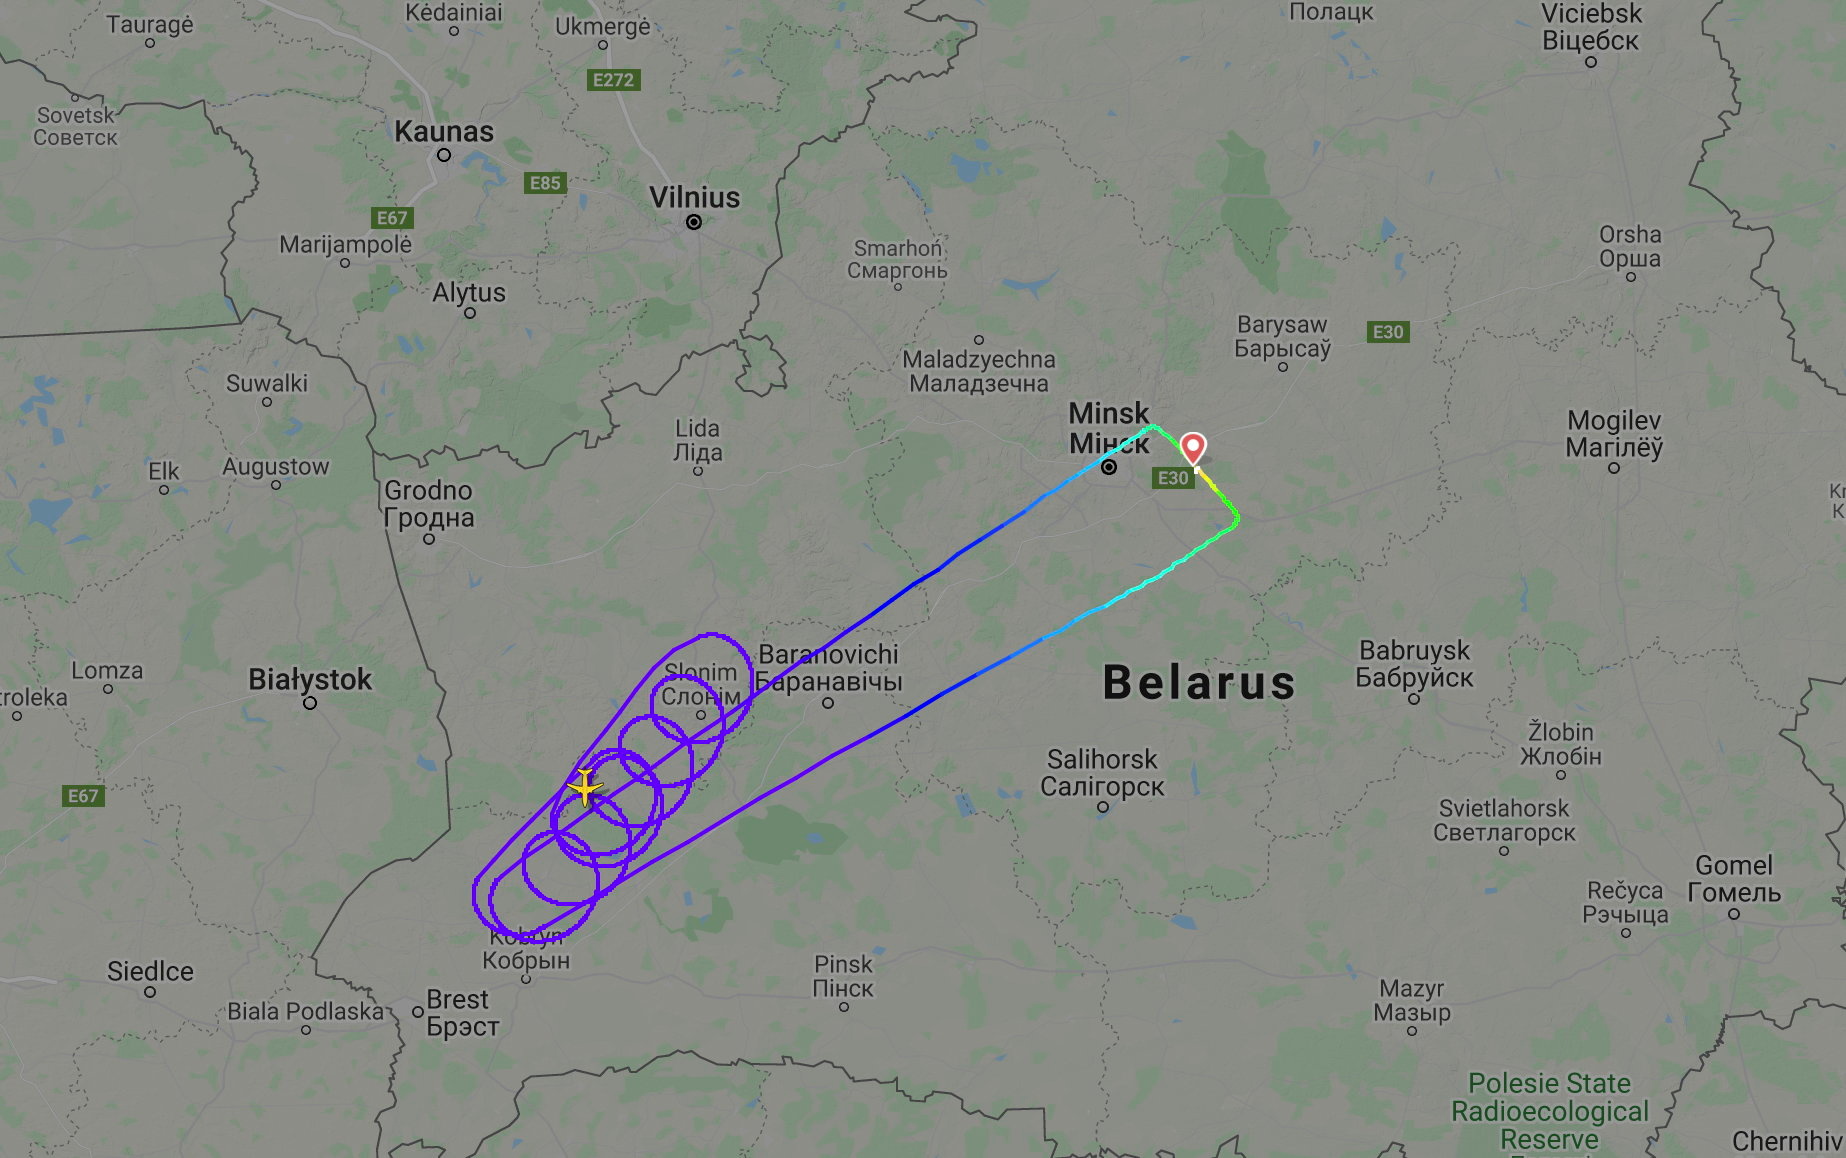 A still image taken from an animated graphic shows the flightpath of Belavia flight 2869 from Minsk to Barcelona flying in circles near Polish border before returning to Minsk